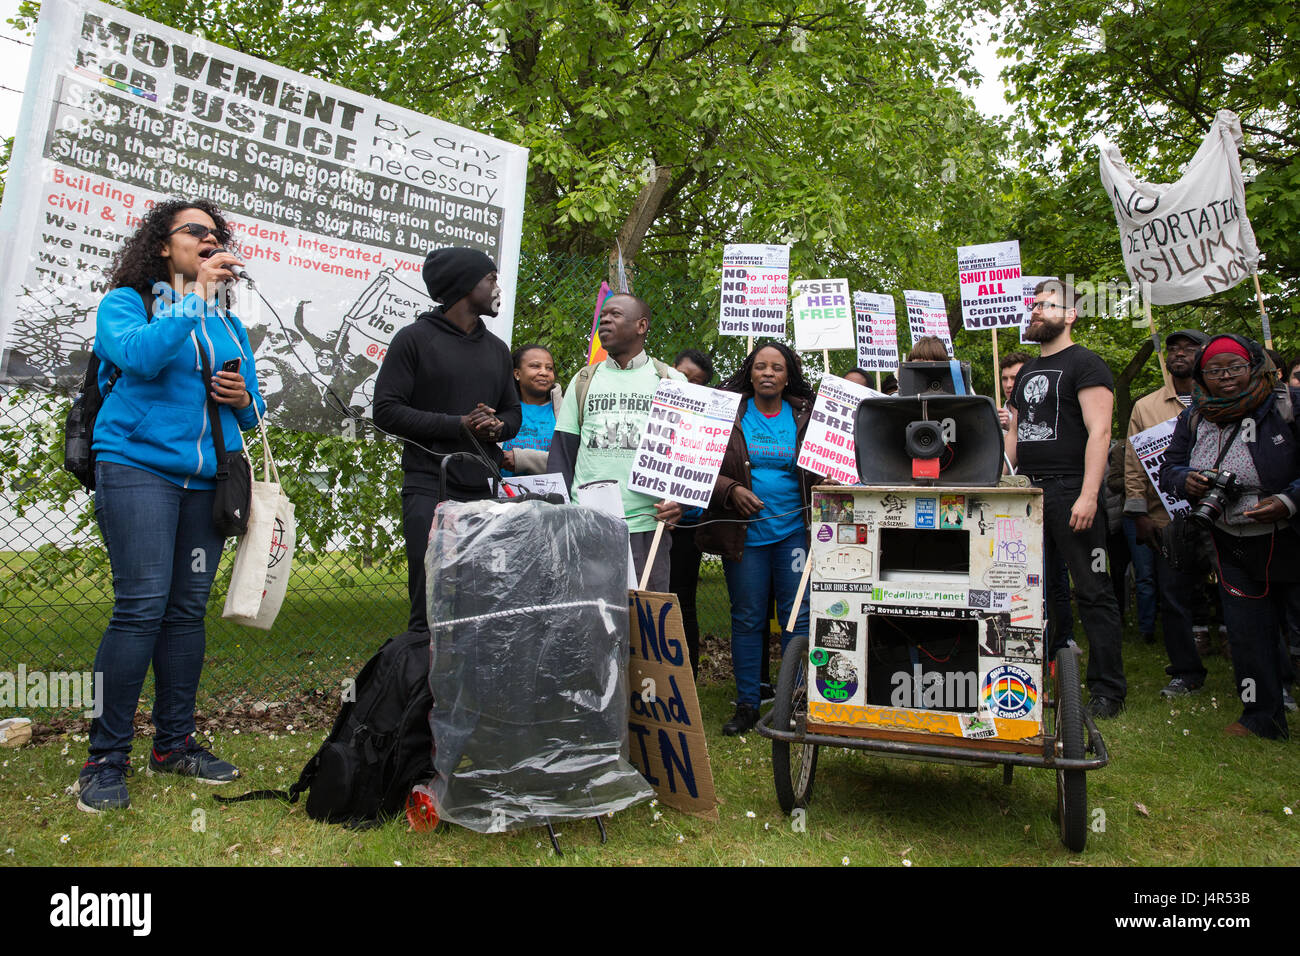 Milton Ernest, UK. 13th May, 2017. Antonia Bright from Movement For Justice By Any Means Necessary addresses a large protest outside Yarl's Wood Immigration Removal Centre calling for all immigration detention centres to be closed. Credit: Mark Kerrison/Alamy Live News Stock Photo